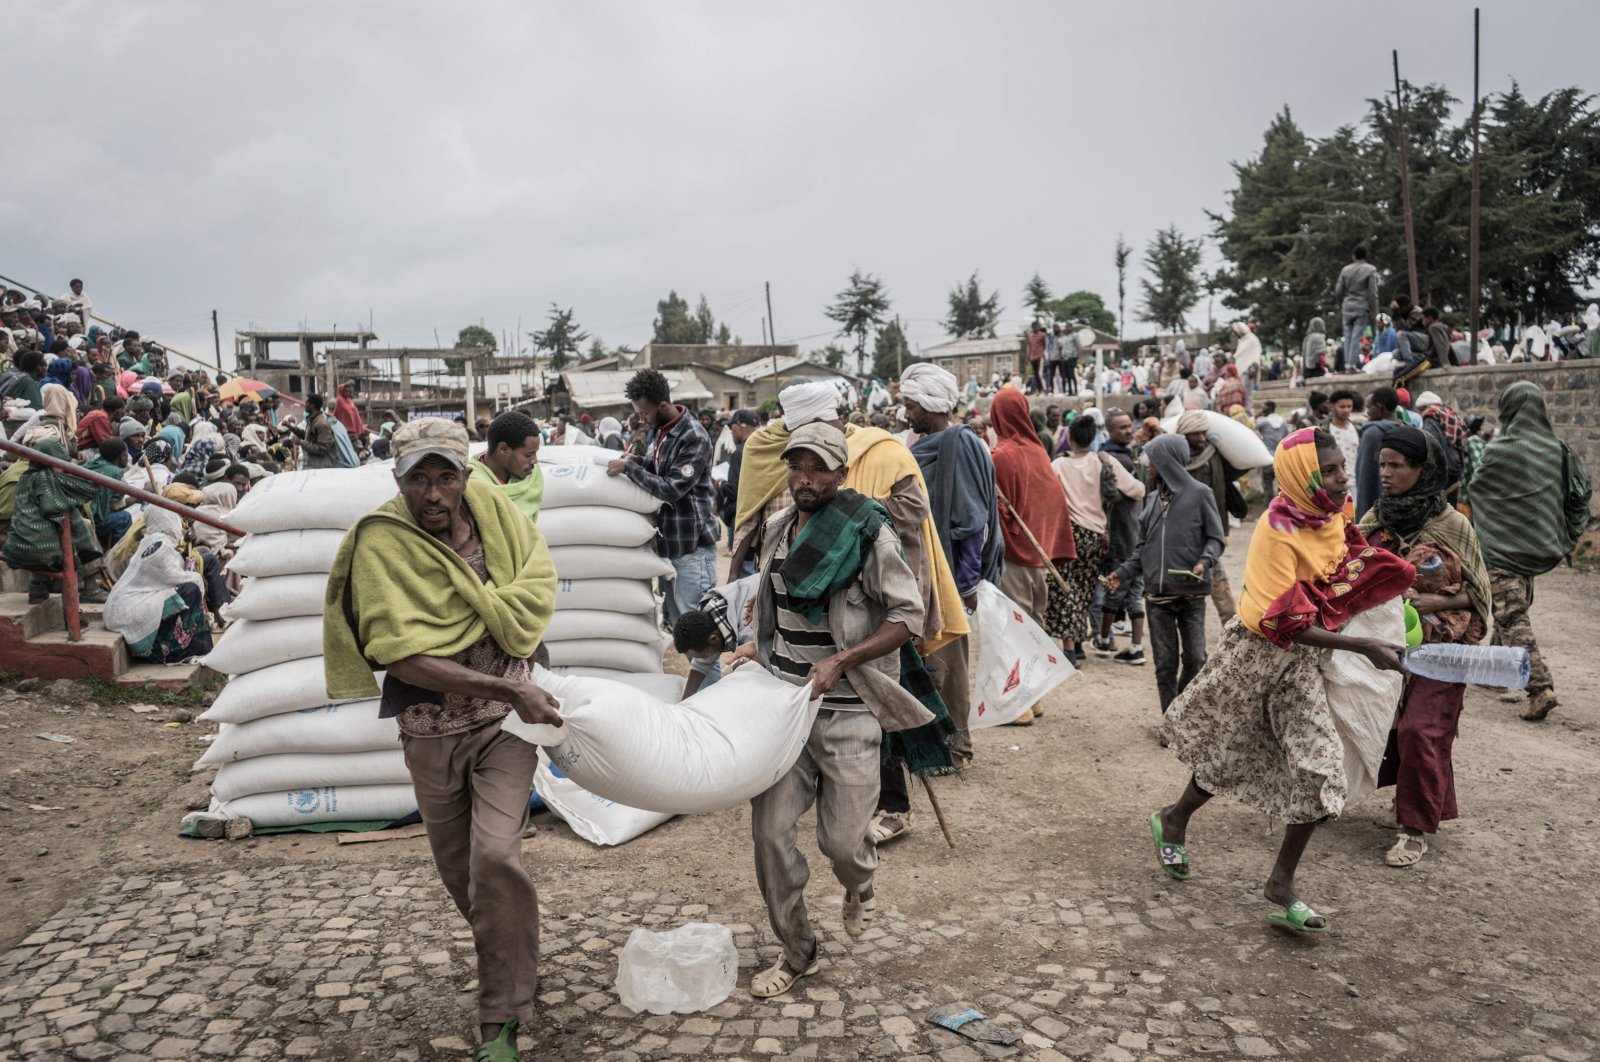 In this file photo taken on Sept. 15, 2021, Men carry a sack of wheat during a food distribution by the World Food Programme (WFP) for internally displaced people (IDP) in Debark, 90 kilometers from the city of Gondar, Ethiopia. (AFP Photo)